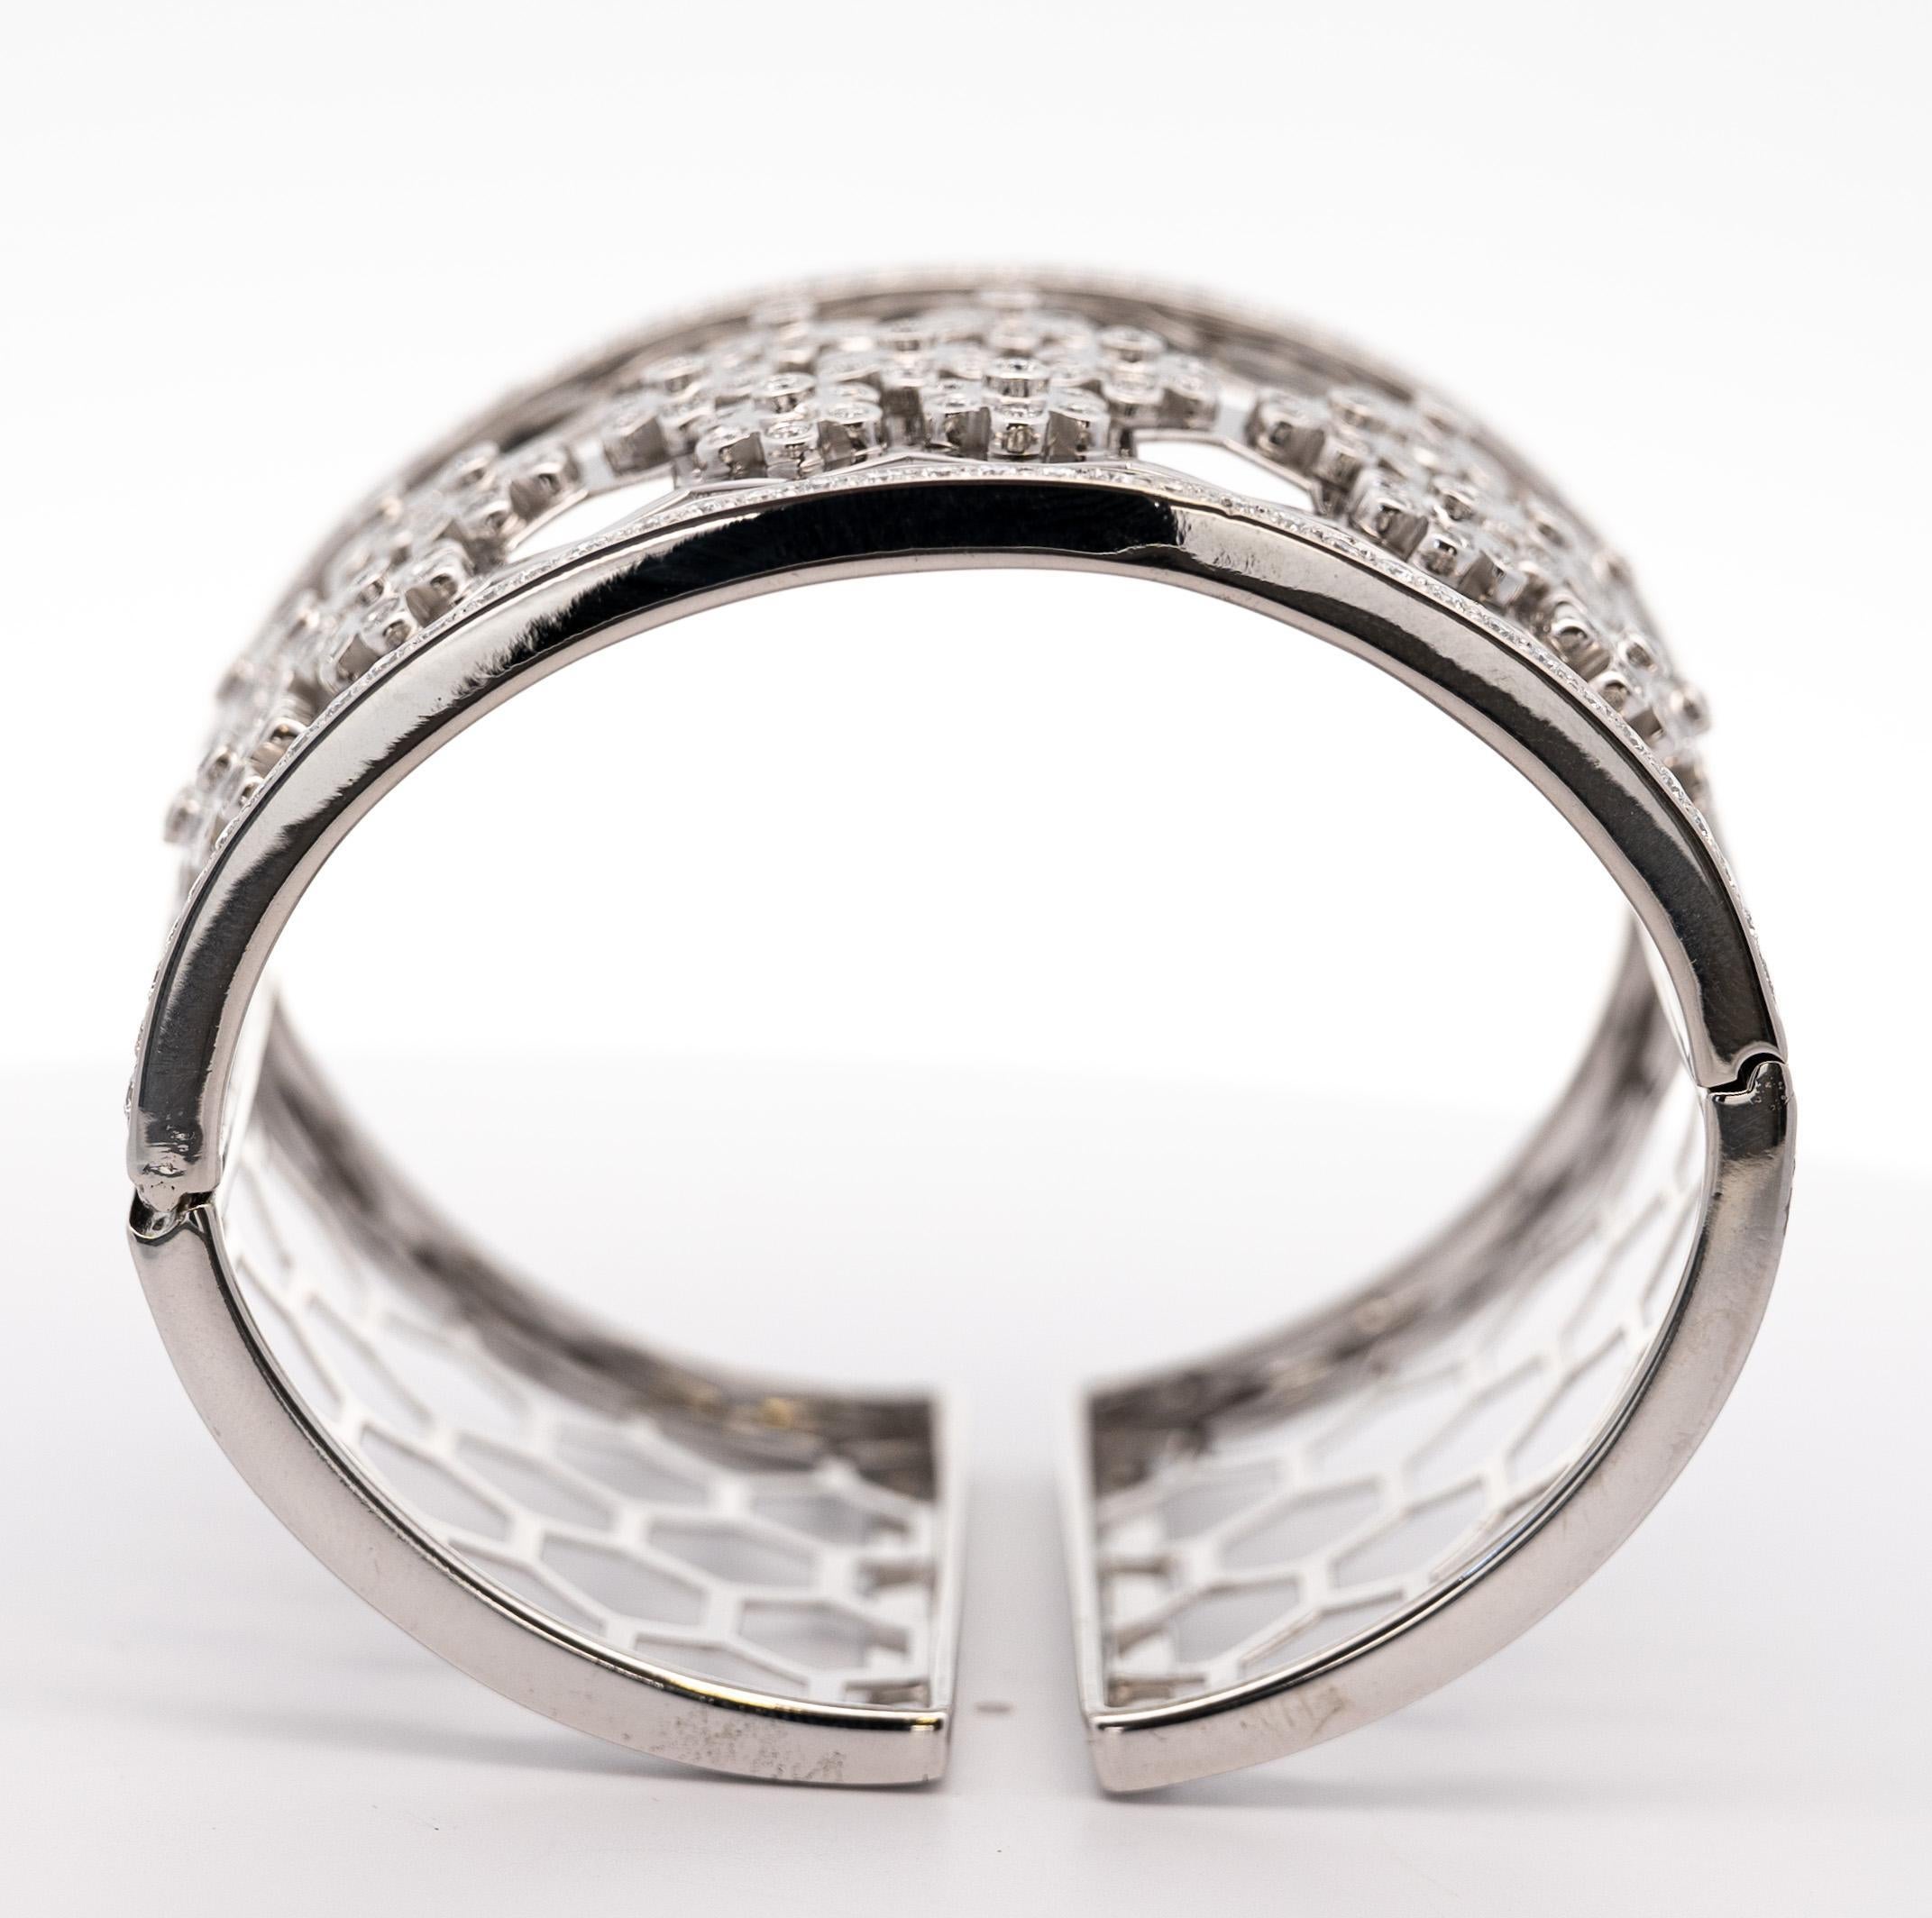 6.5 CTTW Round Cut Diamond Honeycomb Motif 18k White Gold Bangle Bracelet In New Condition For Sale In Miami, FL